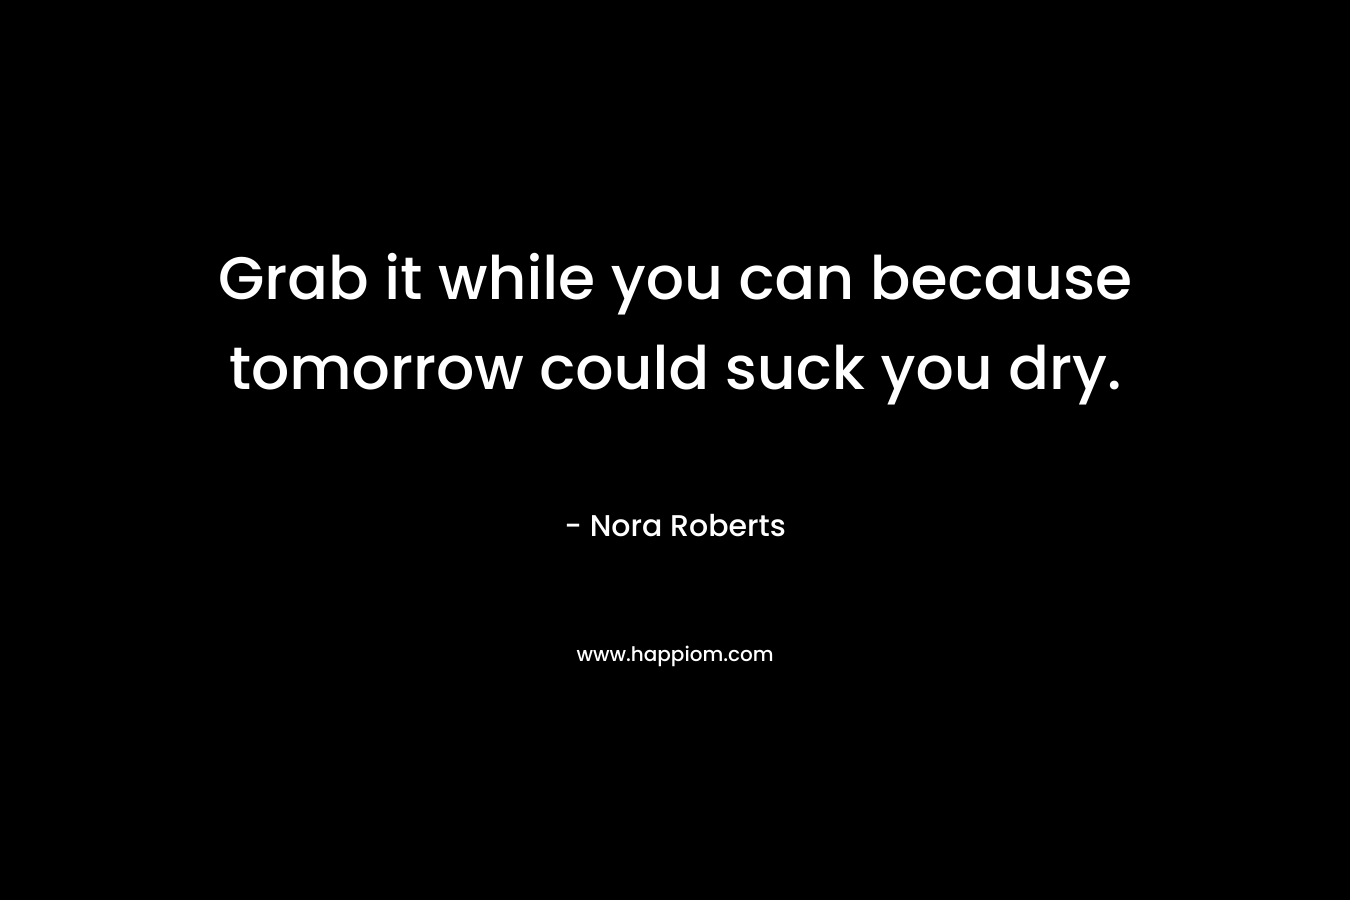 Grab it while you can because tomorrow could suck you dry. – Nora Roberts